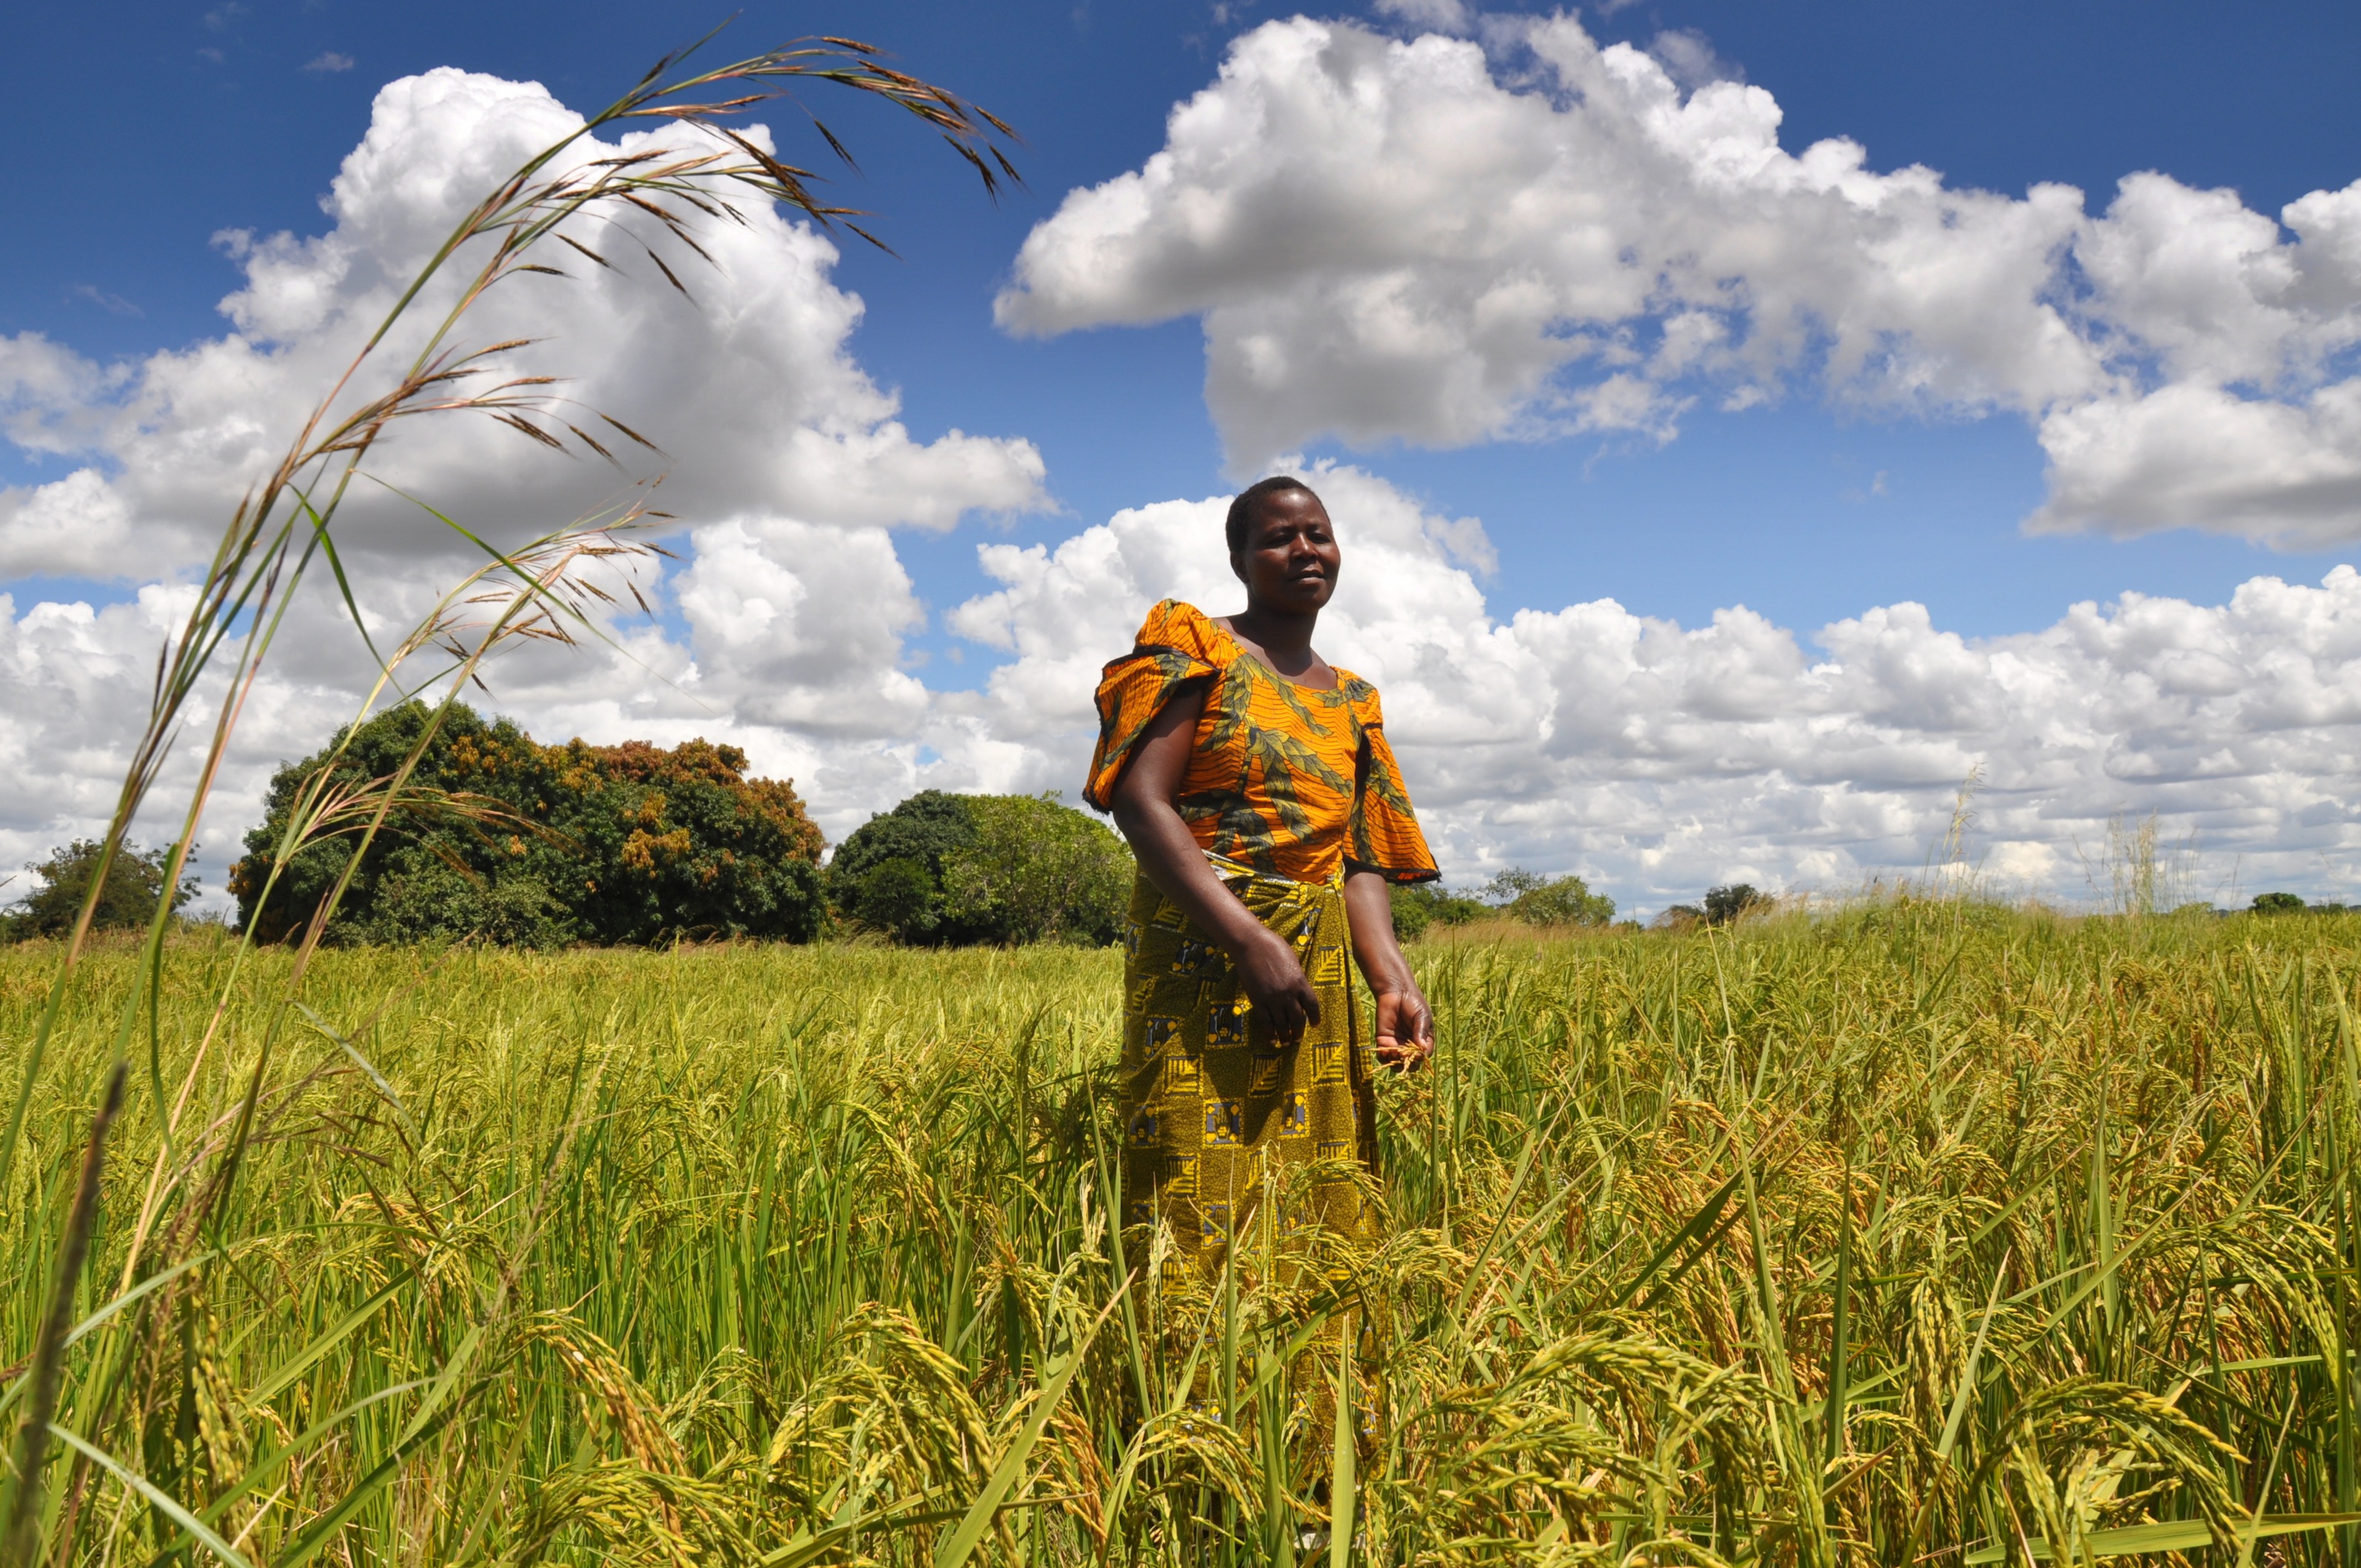 Transforming agriculture is transforming Africa